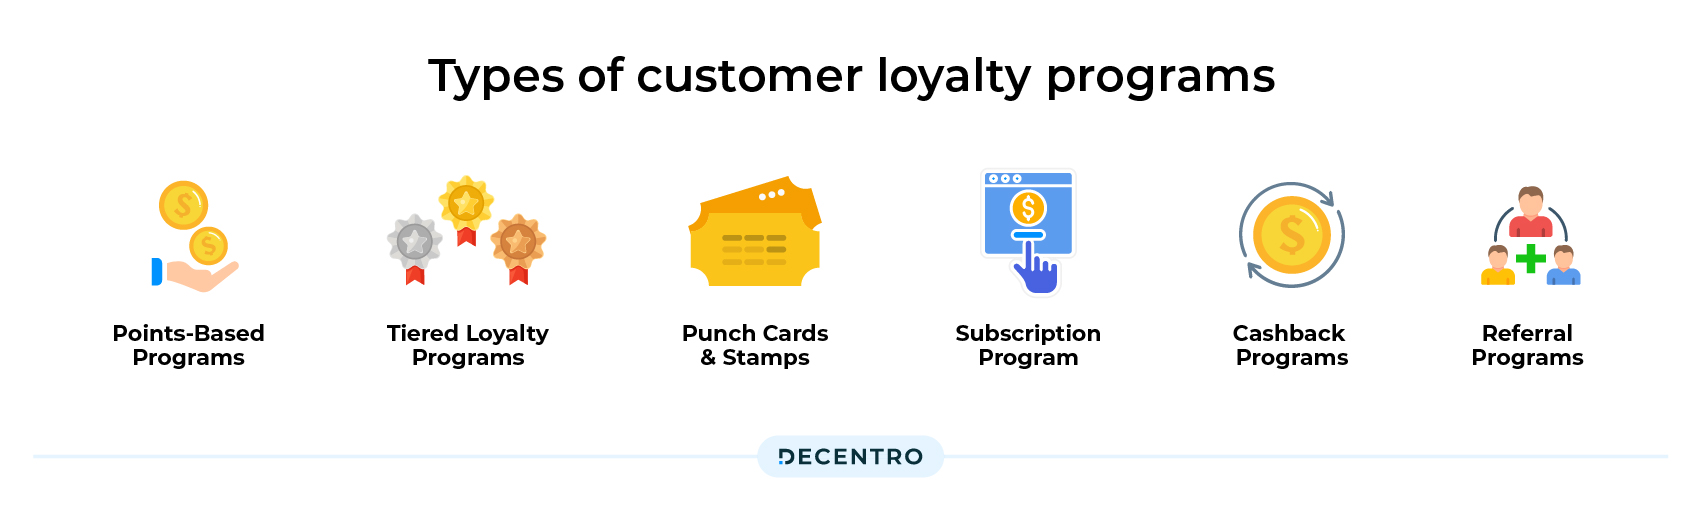 Different types of customer loyalty programs